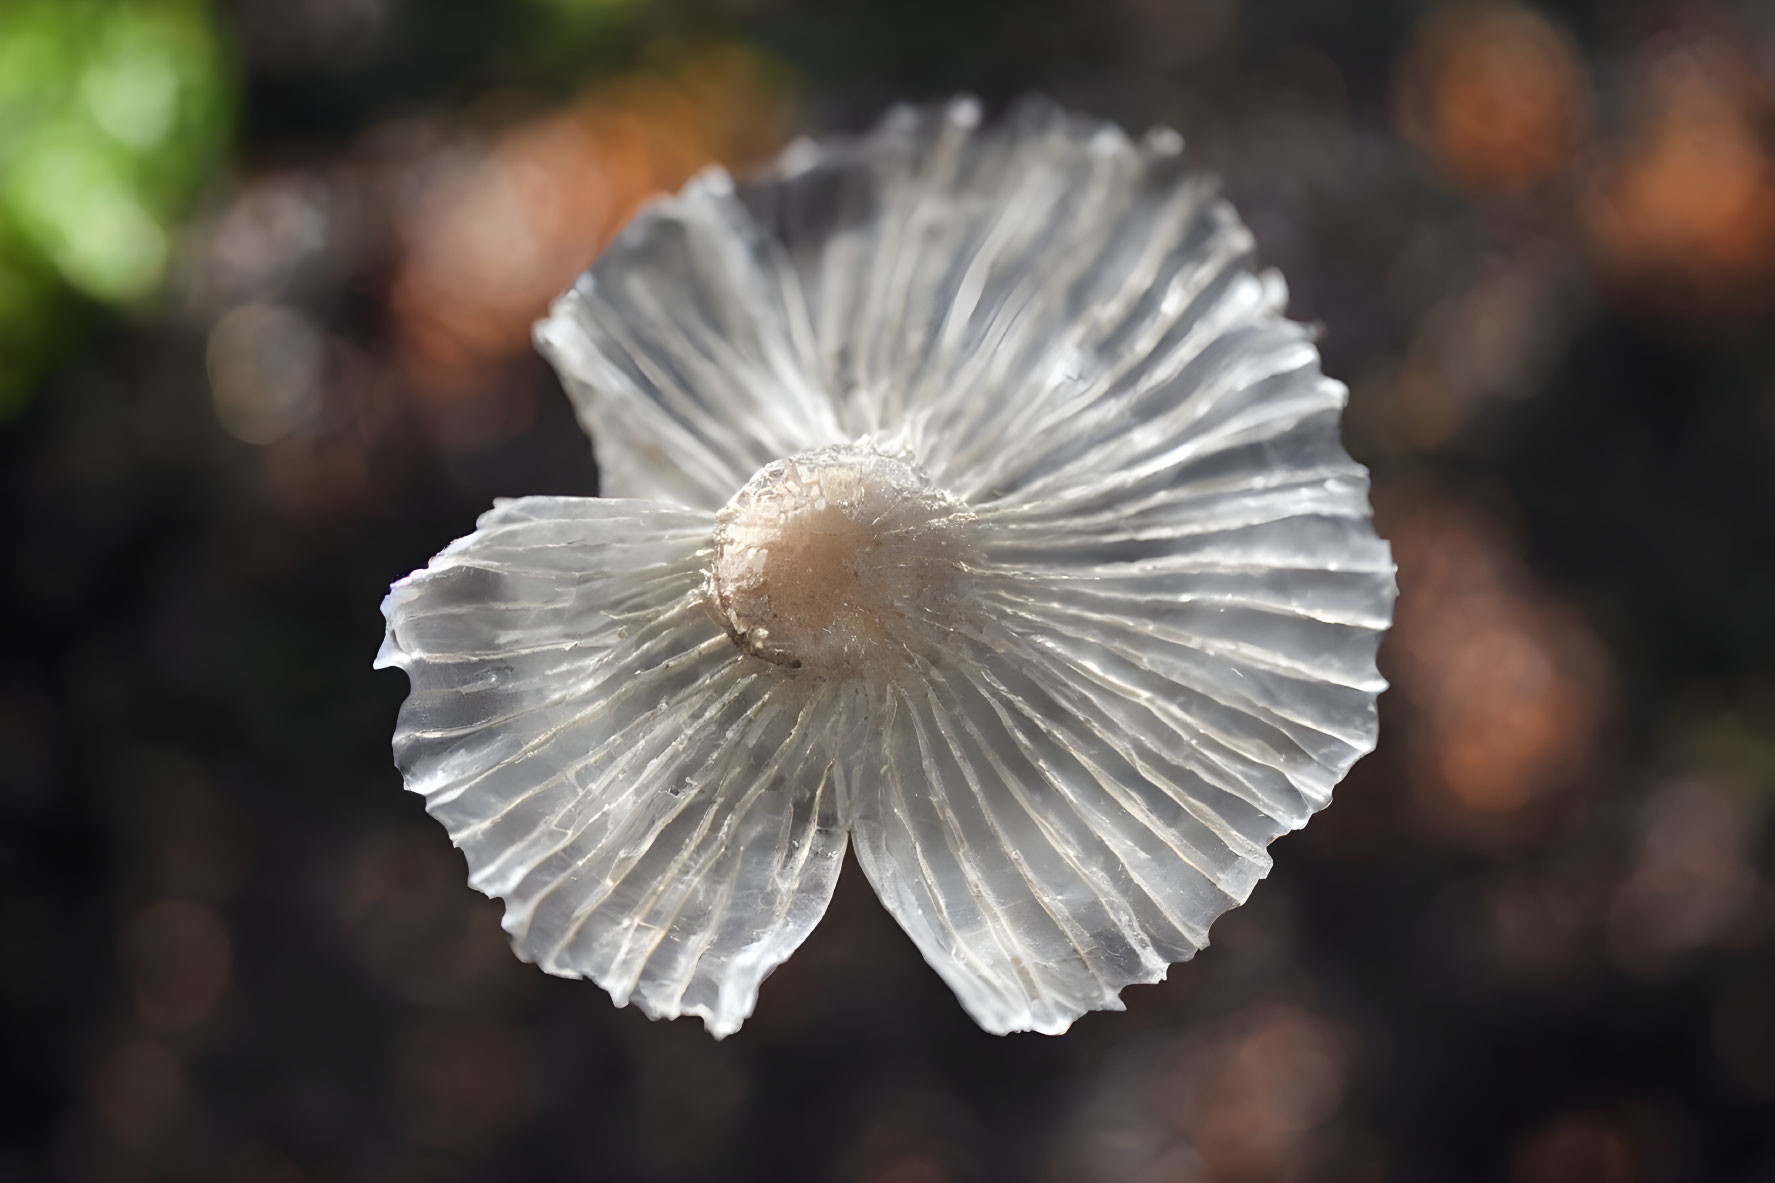 Delicate White Mushroom Cap with Gills on Earthy Background